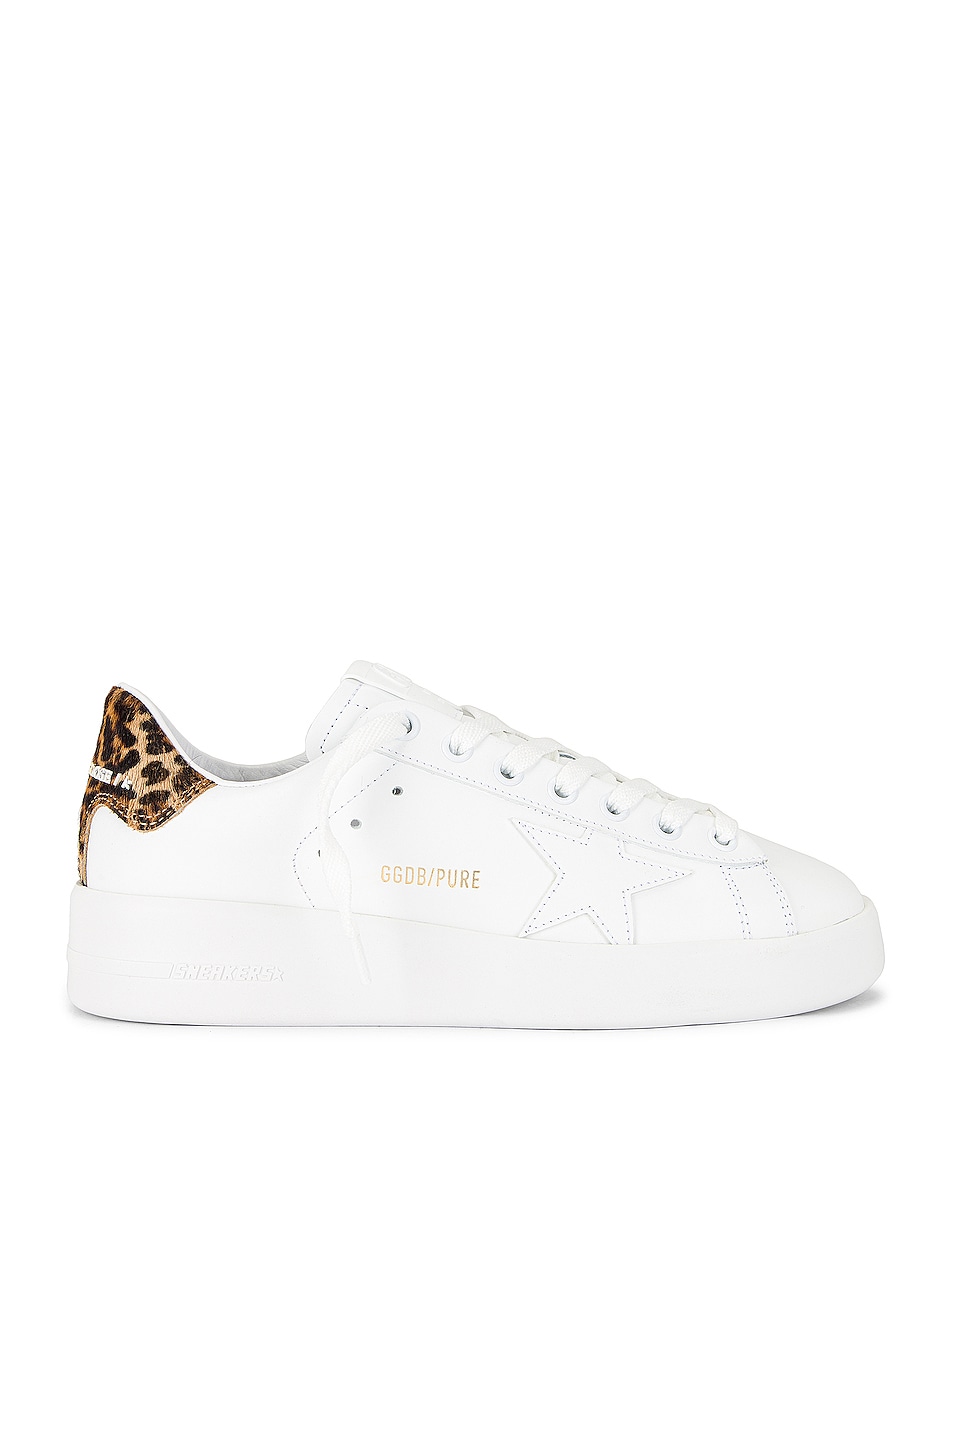 Image 1 of Golden Goose Pure Star Sneaker in White & Brown Leopard